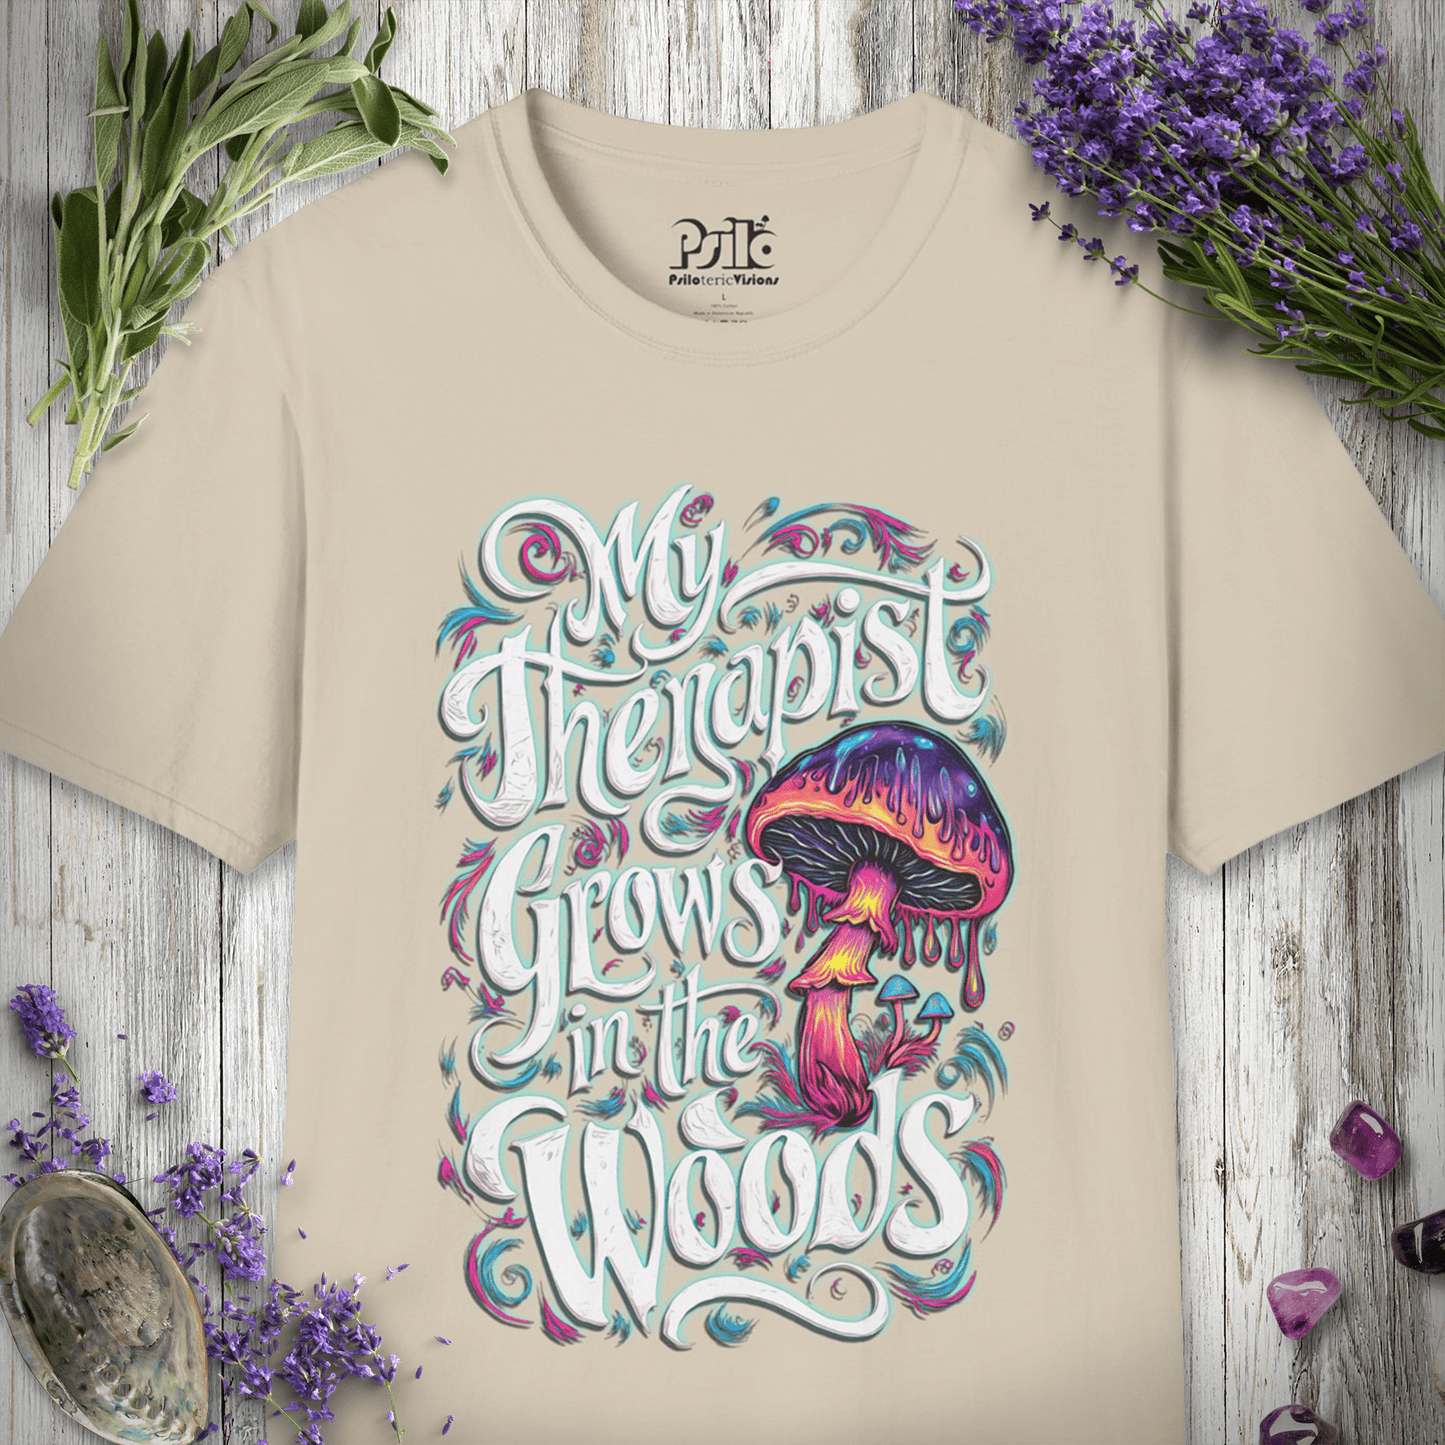 "My Therapist Grows In the Woods" Unisex T-SHIRT